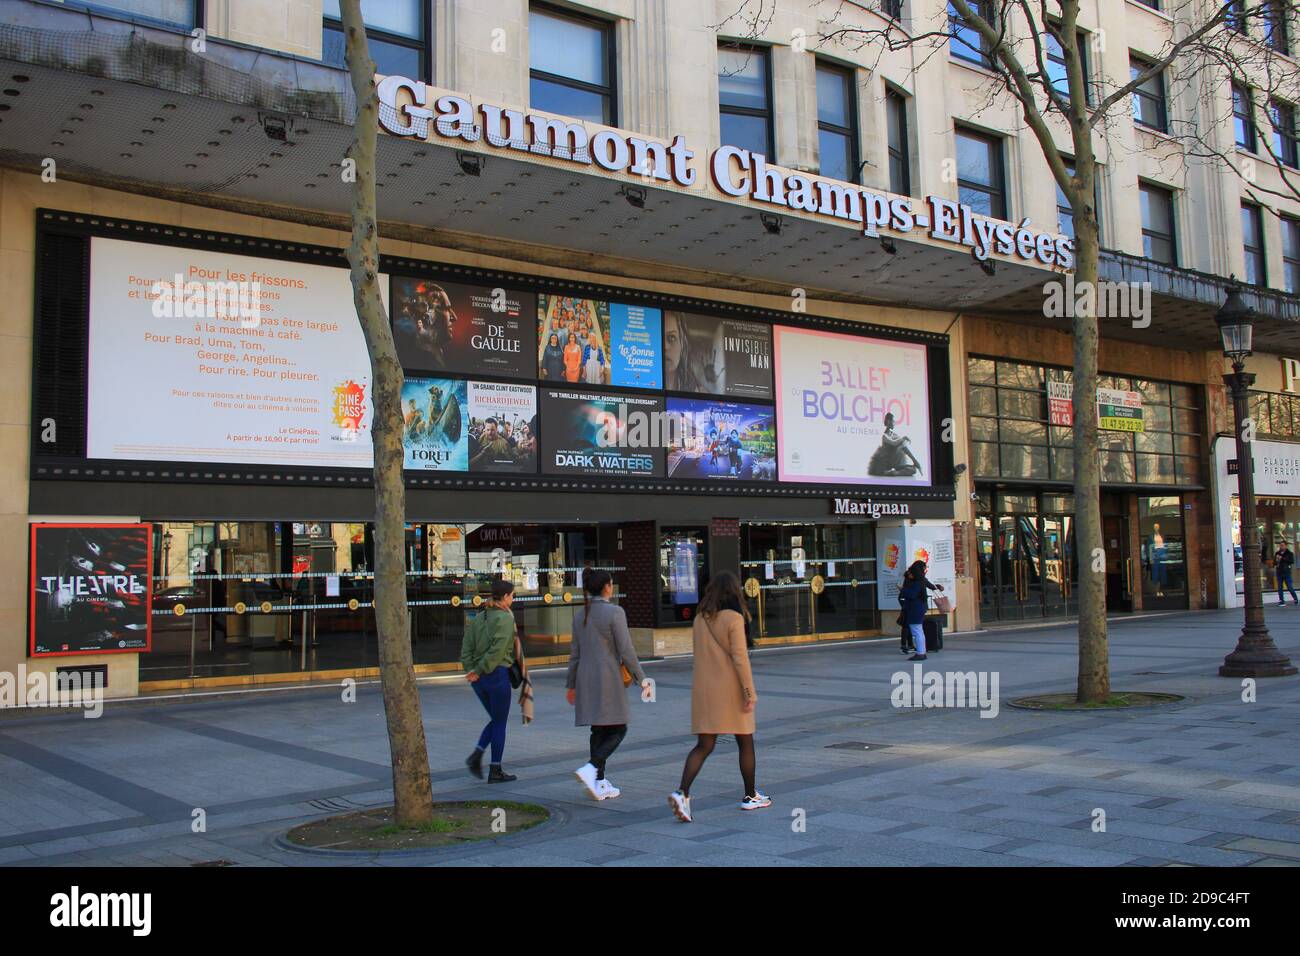 Paris, France. March 15. 2020.  Film screening room. Closed for containment because of the coronavirus. Famous place of cinema. Stock Photo